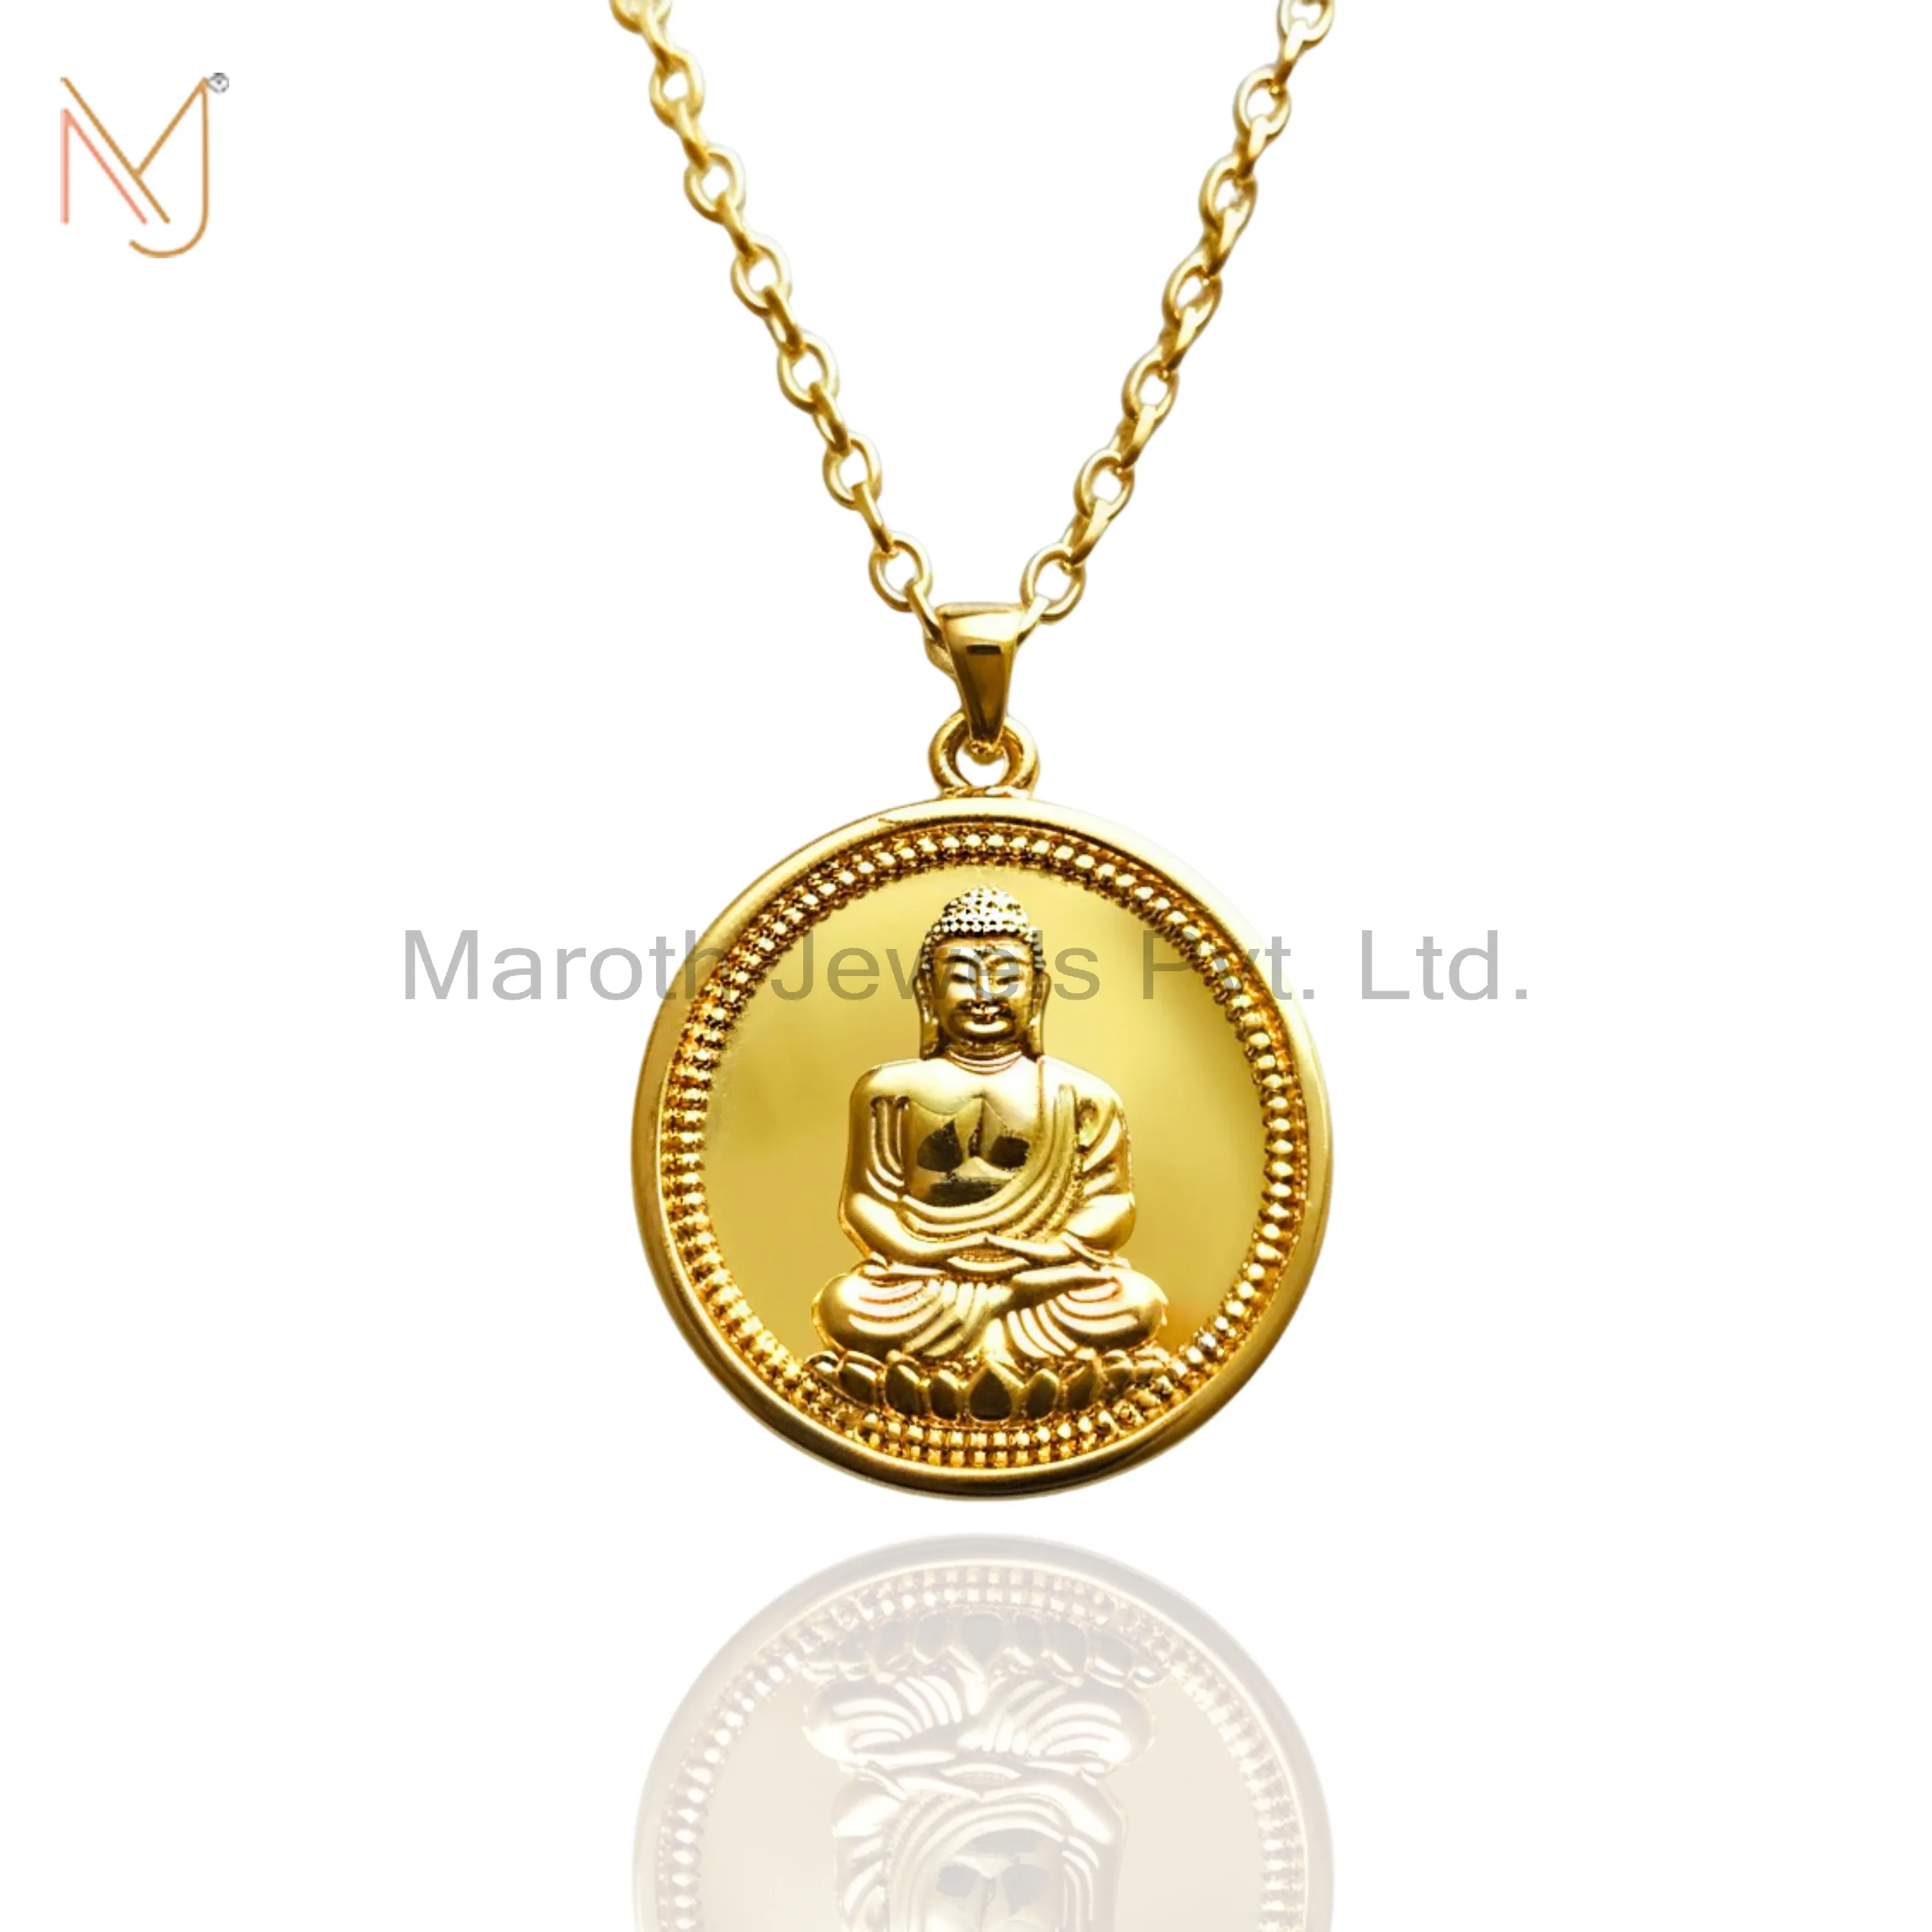 Private Label 925 Silver Yellow Gold Plated Buddha Necklace